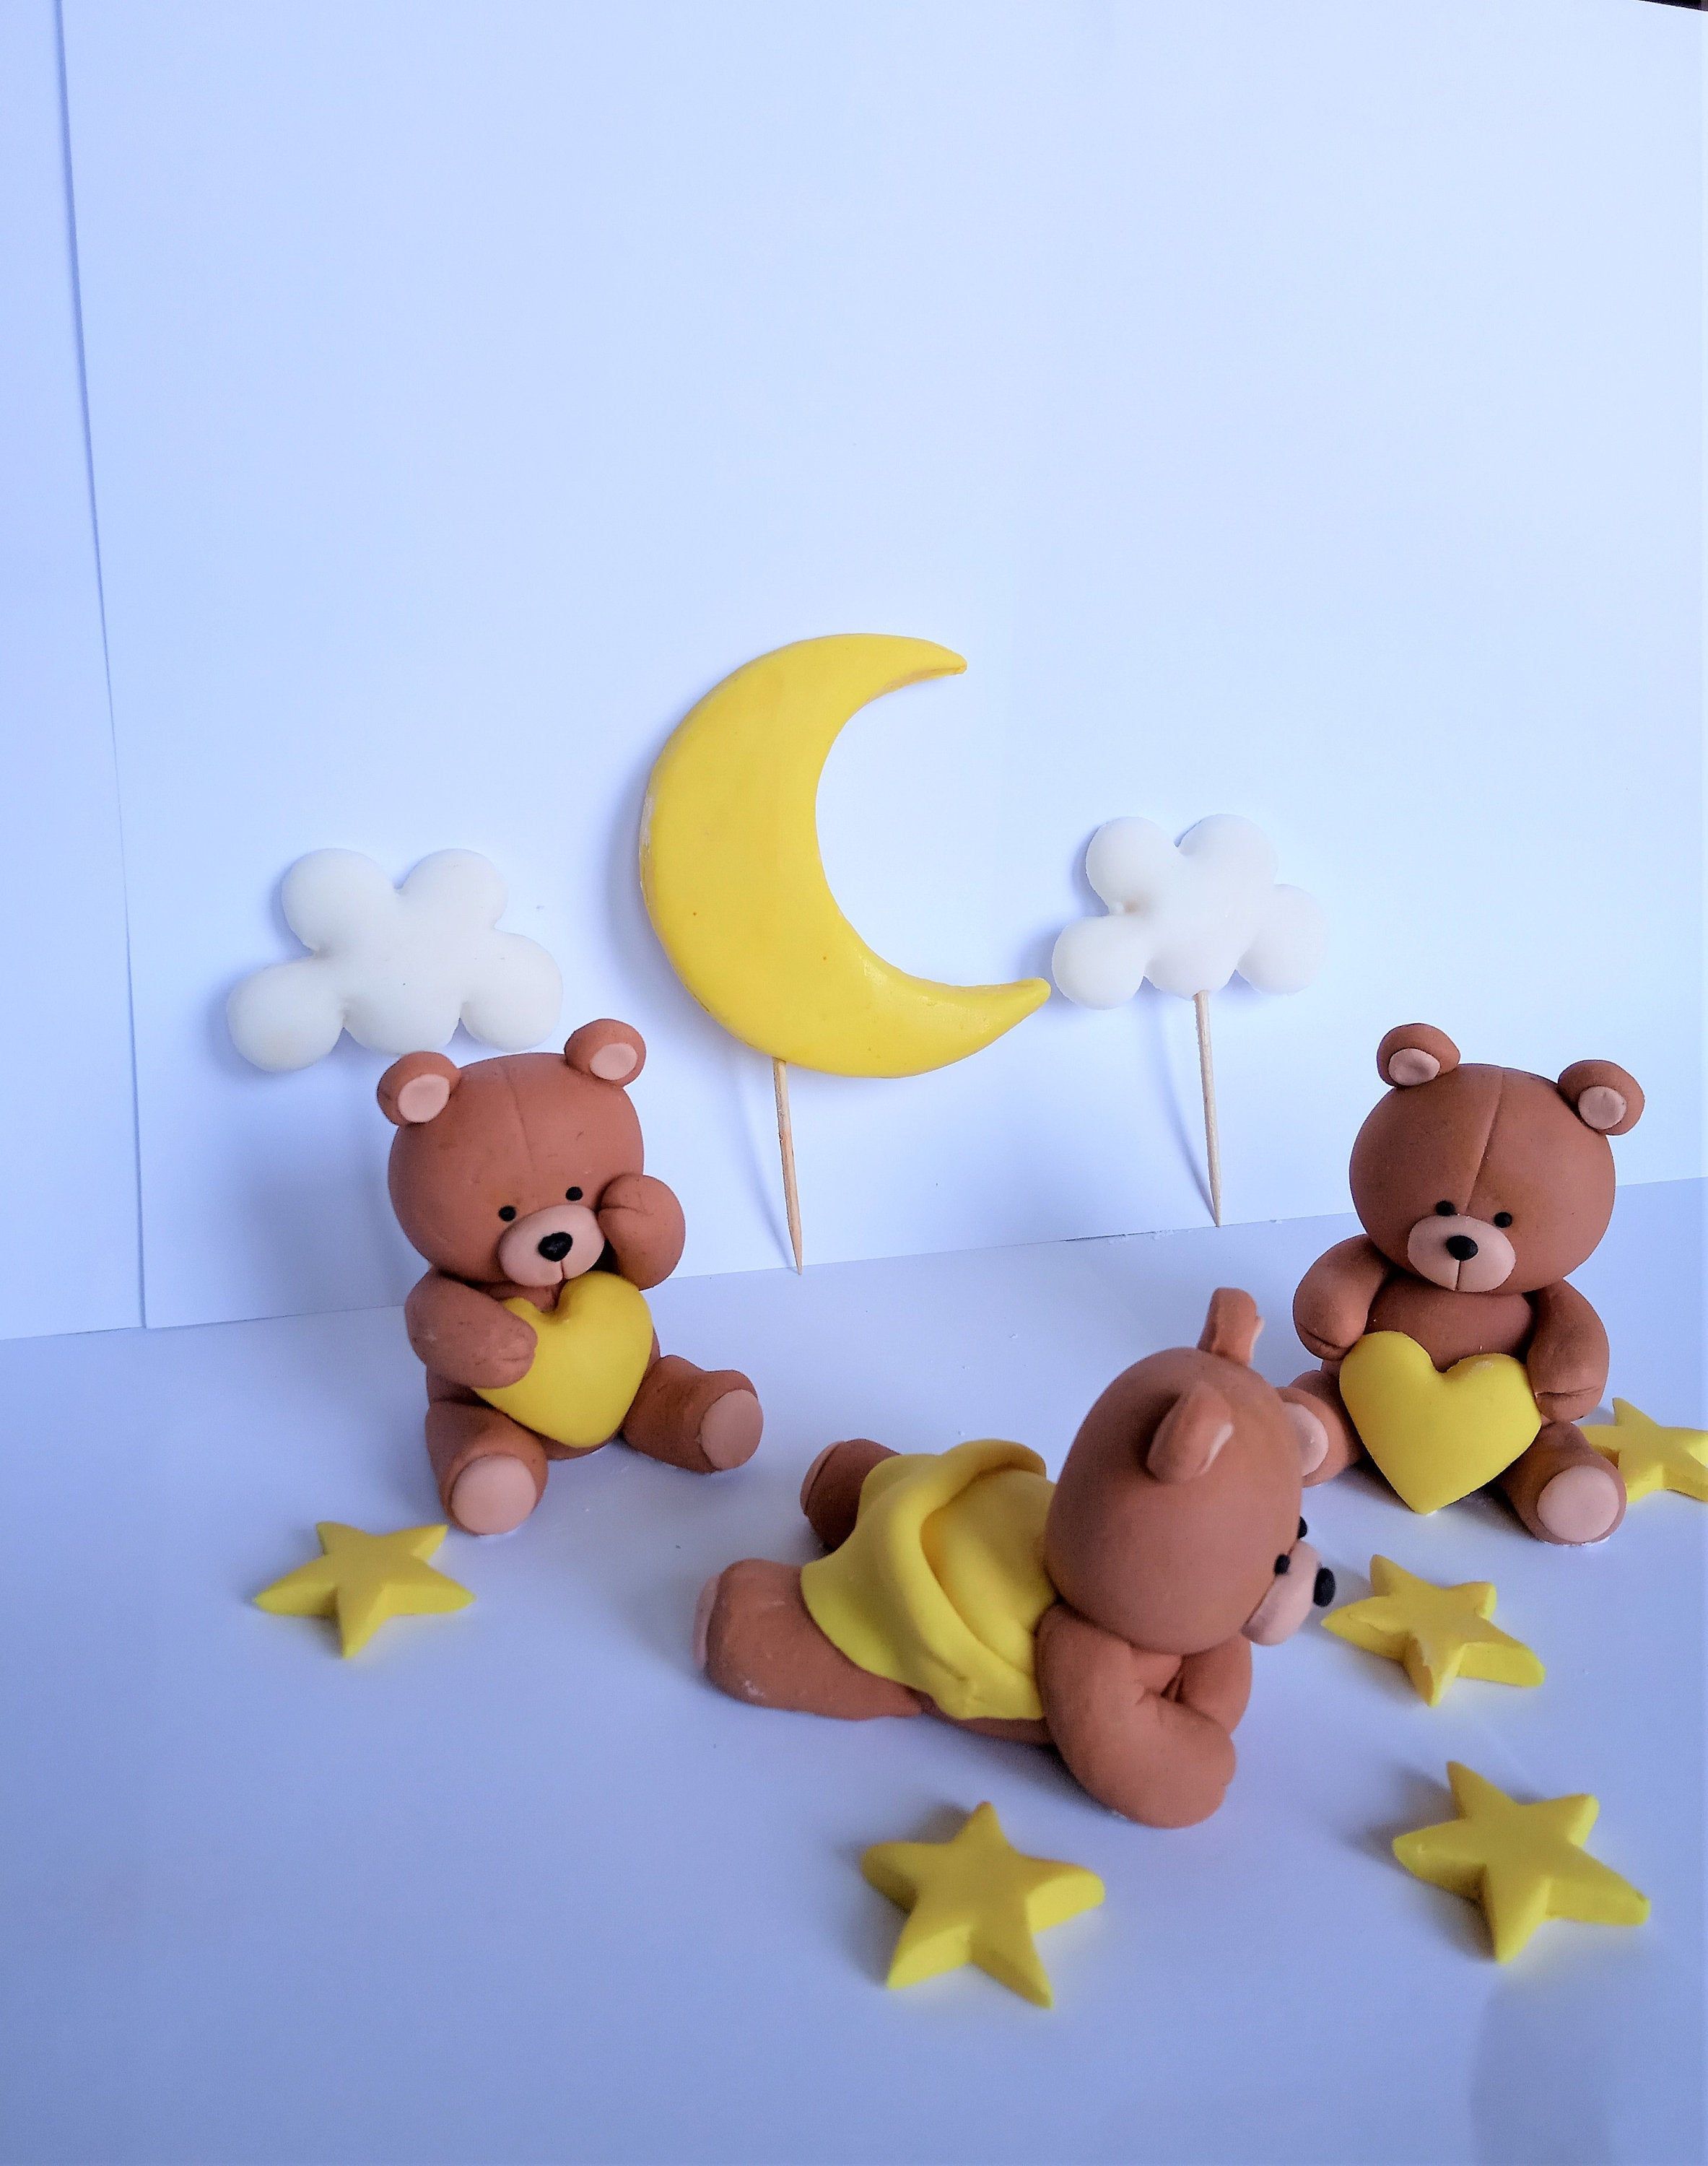 Fondant Teddy Bears with moon and clouds Cake Topper, Fondant Cake Topper for Birthday or Baby Shower, Personalised -   18 cake Fondant products ideas